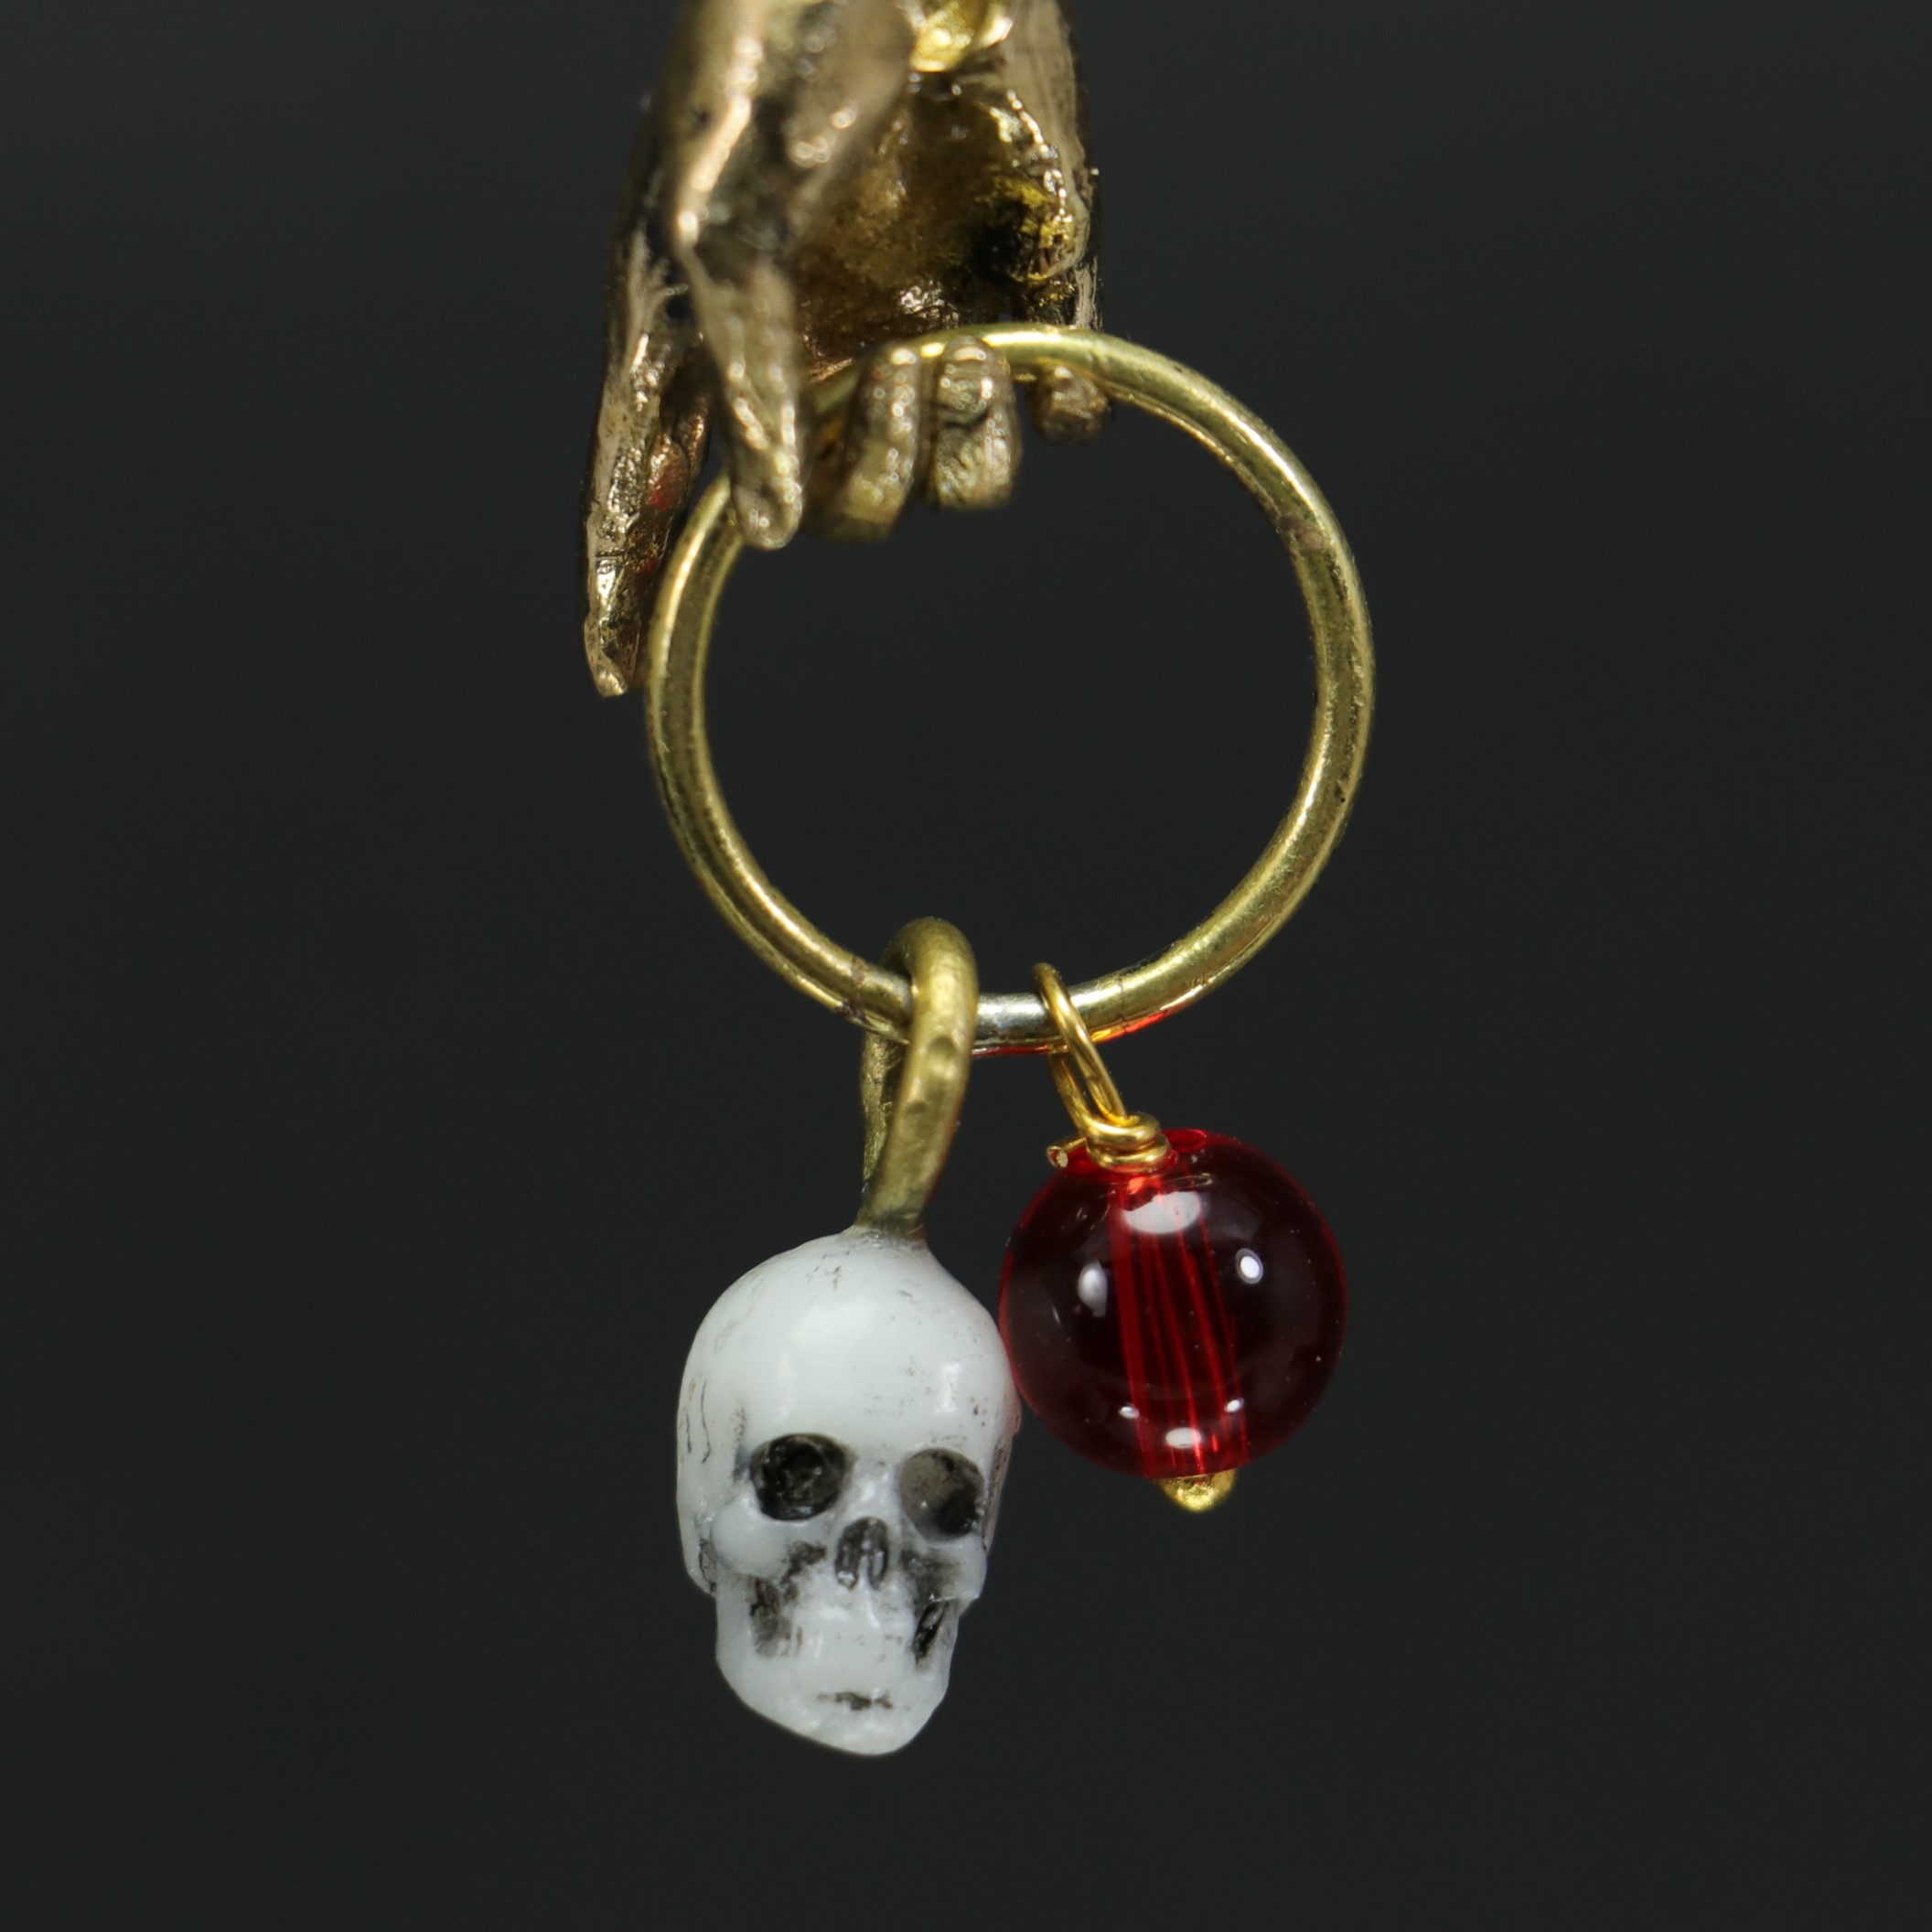 Hand and Skull Garnet Stone Necklace